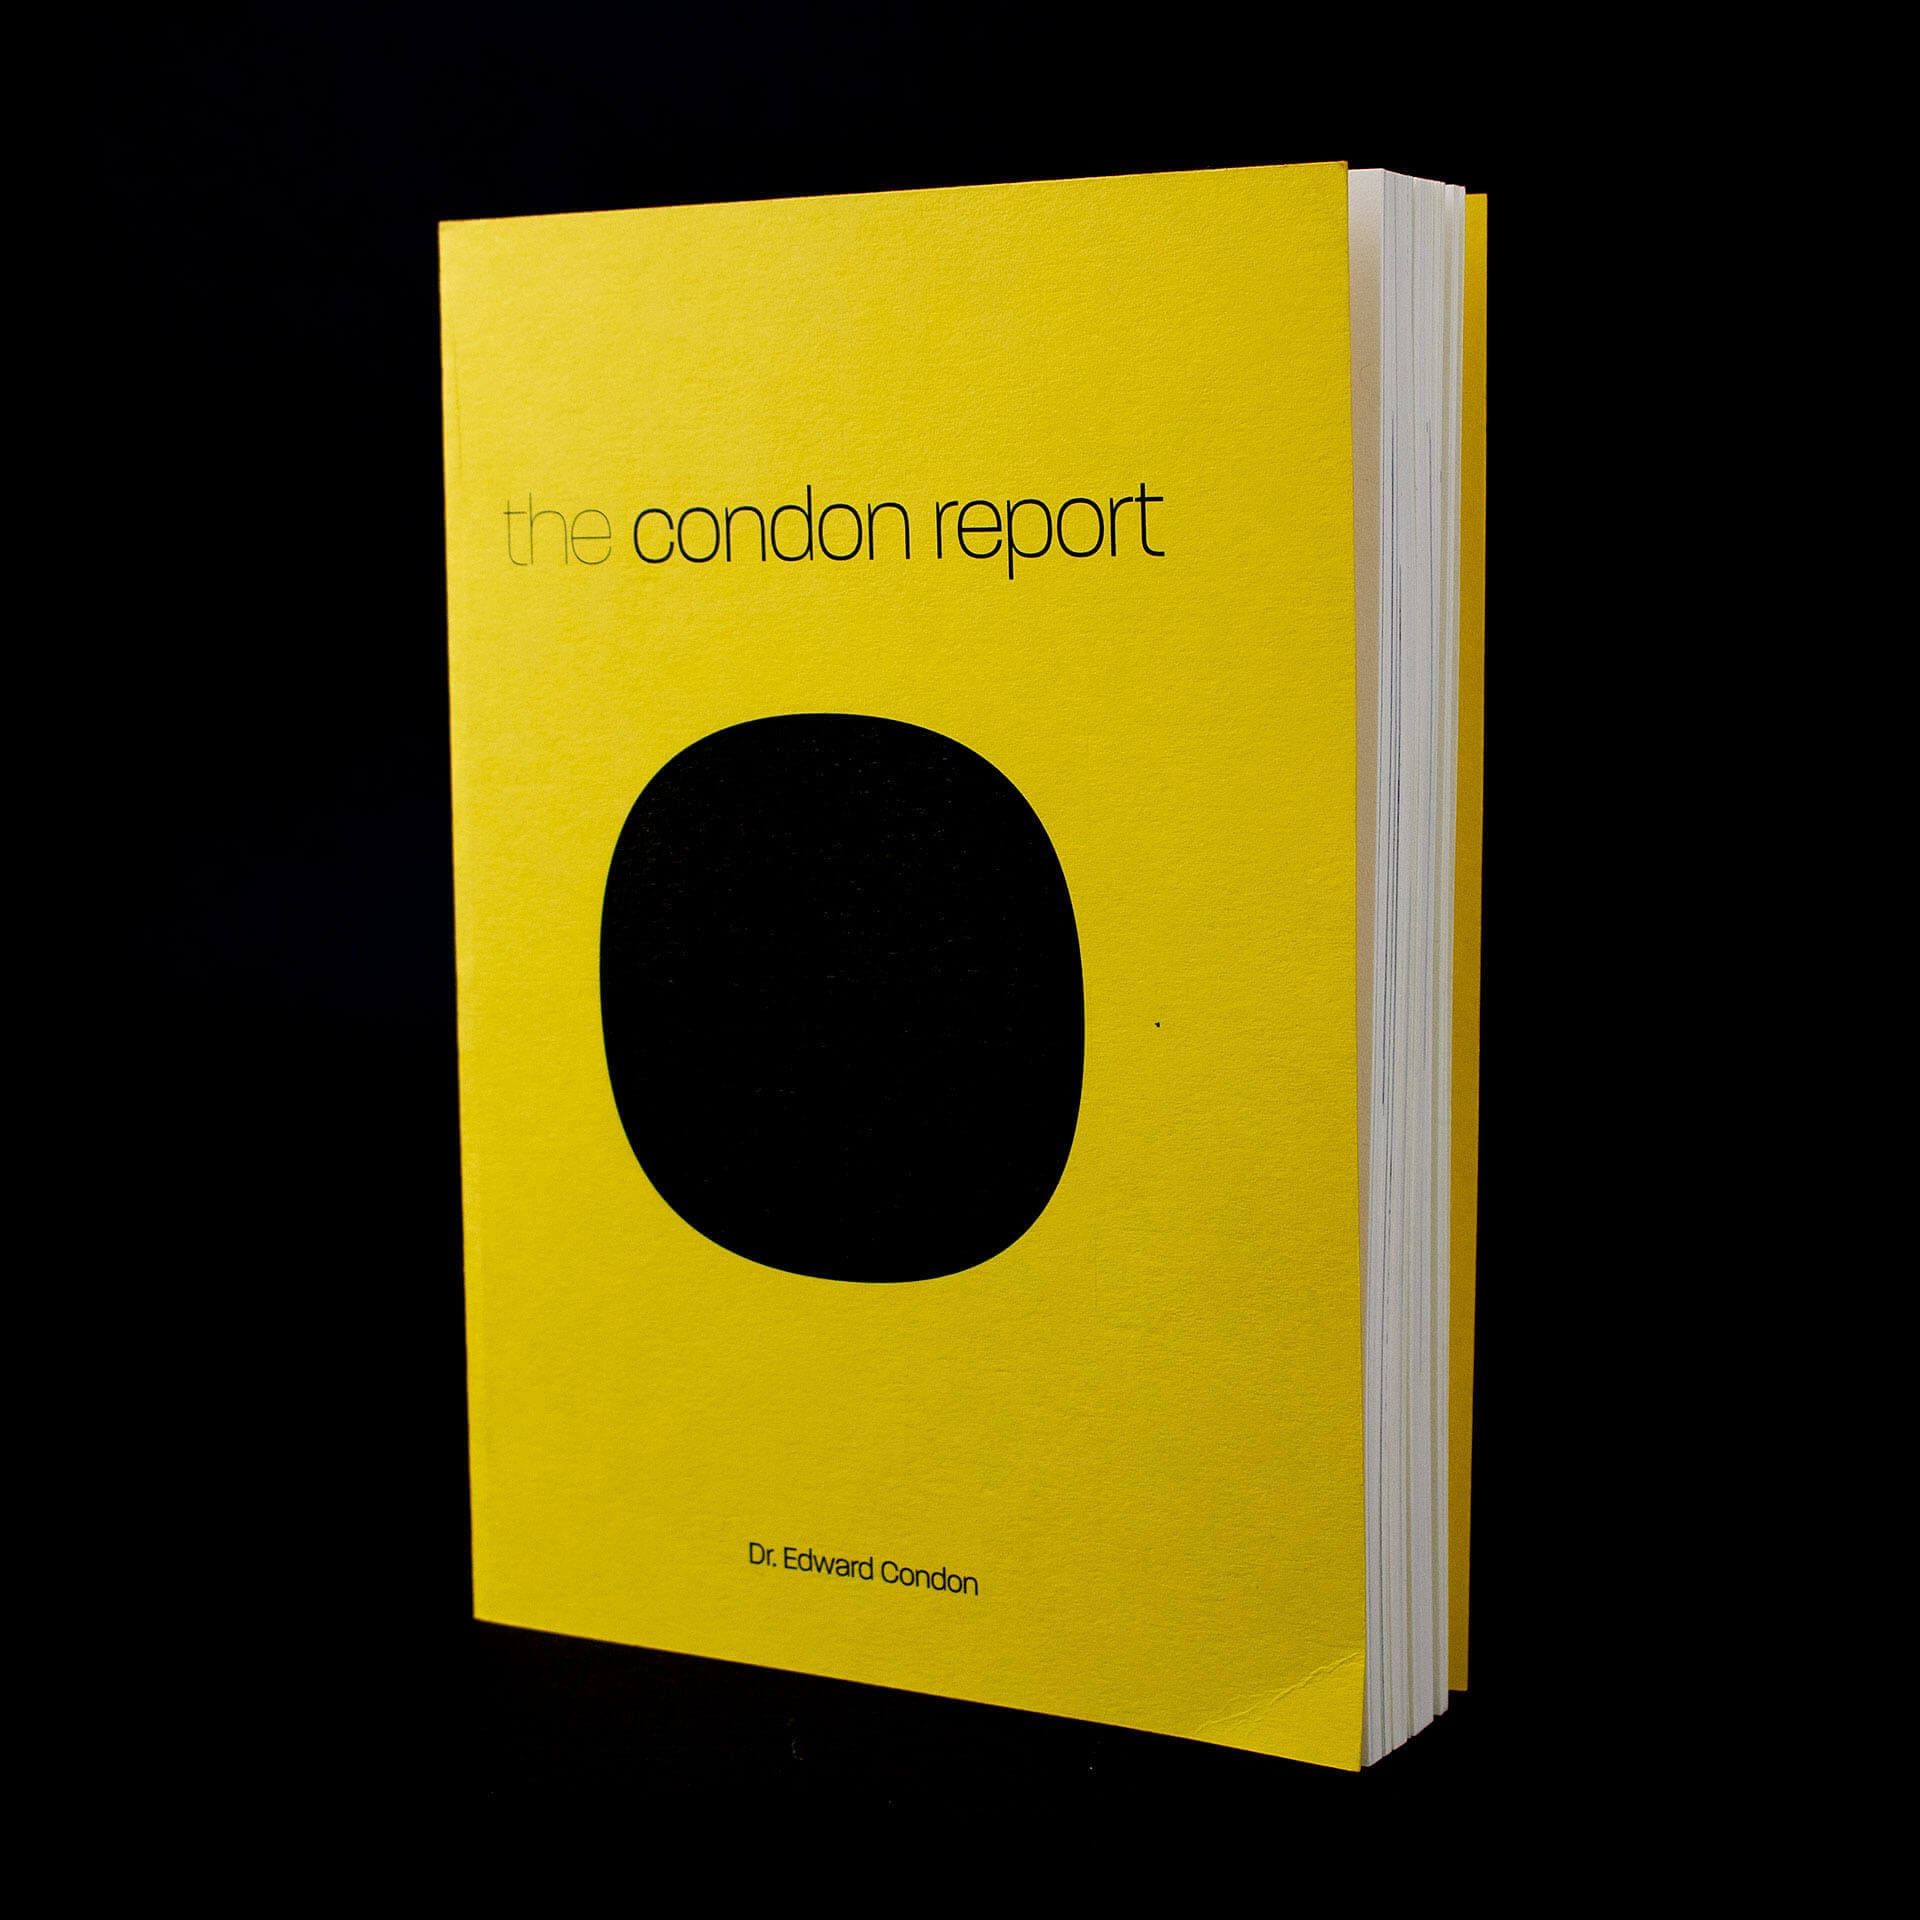 Photo of the book The Condon Report: Scientific Study of Unidentified Flying Objects. Shows a book with a yellow cover with a large black dot in the middle with a thin black title reading "the condon report". Depicted against a black background.